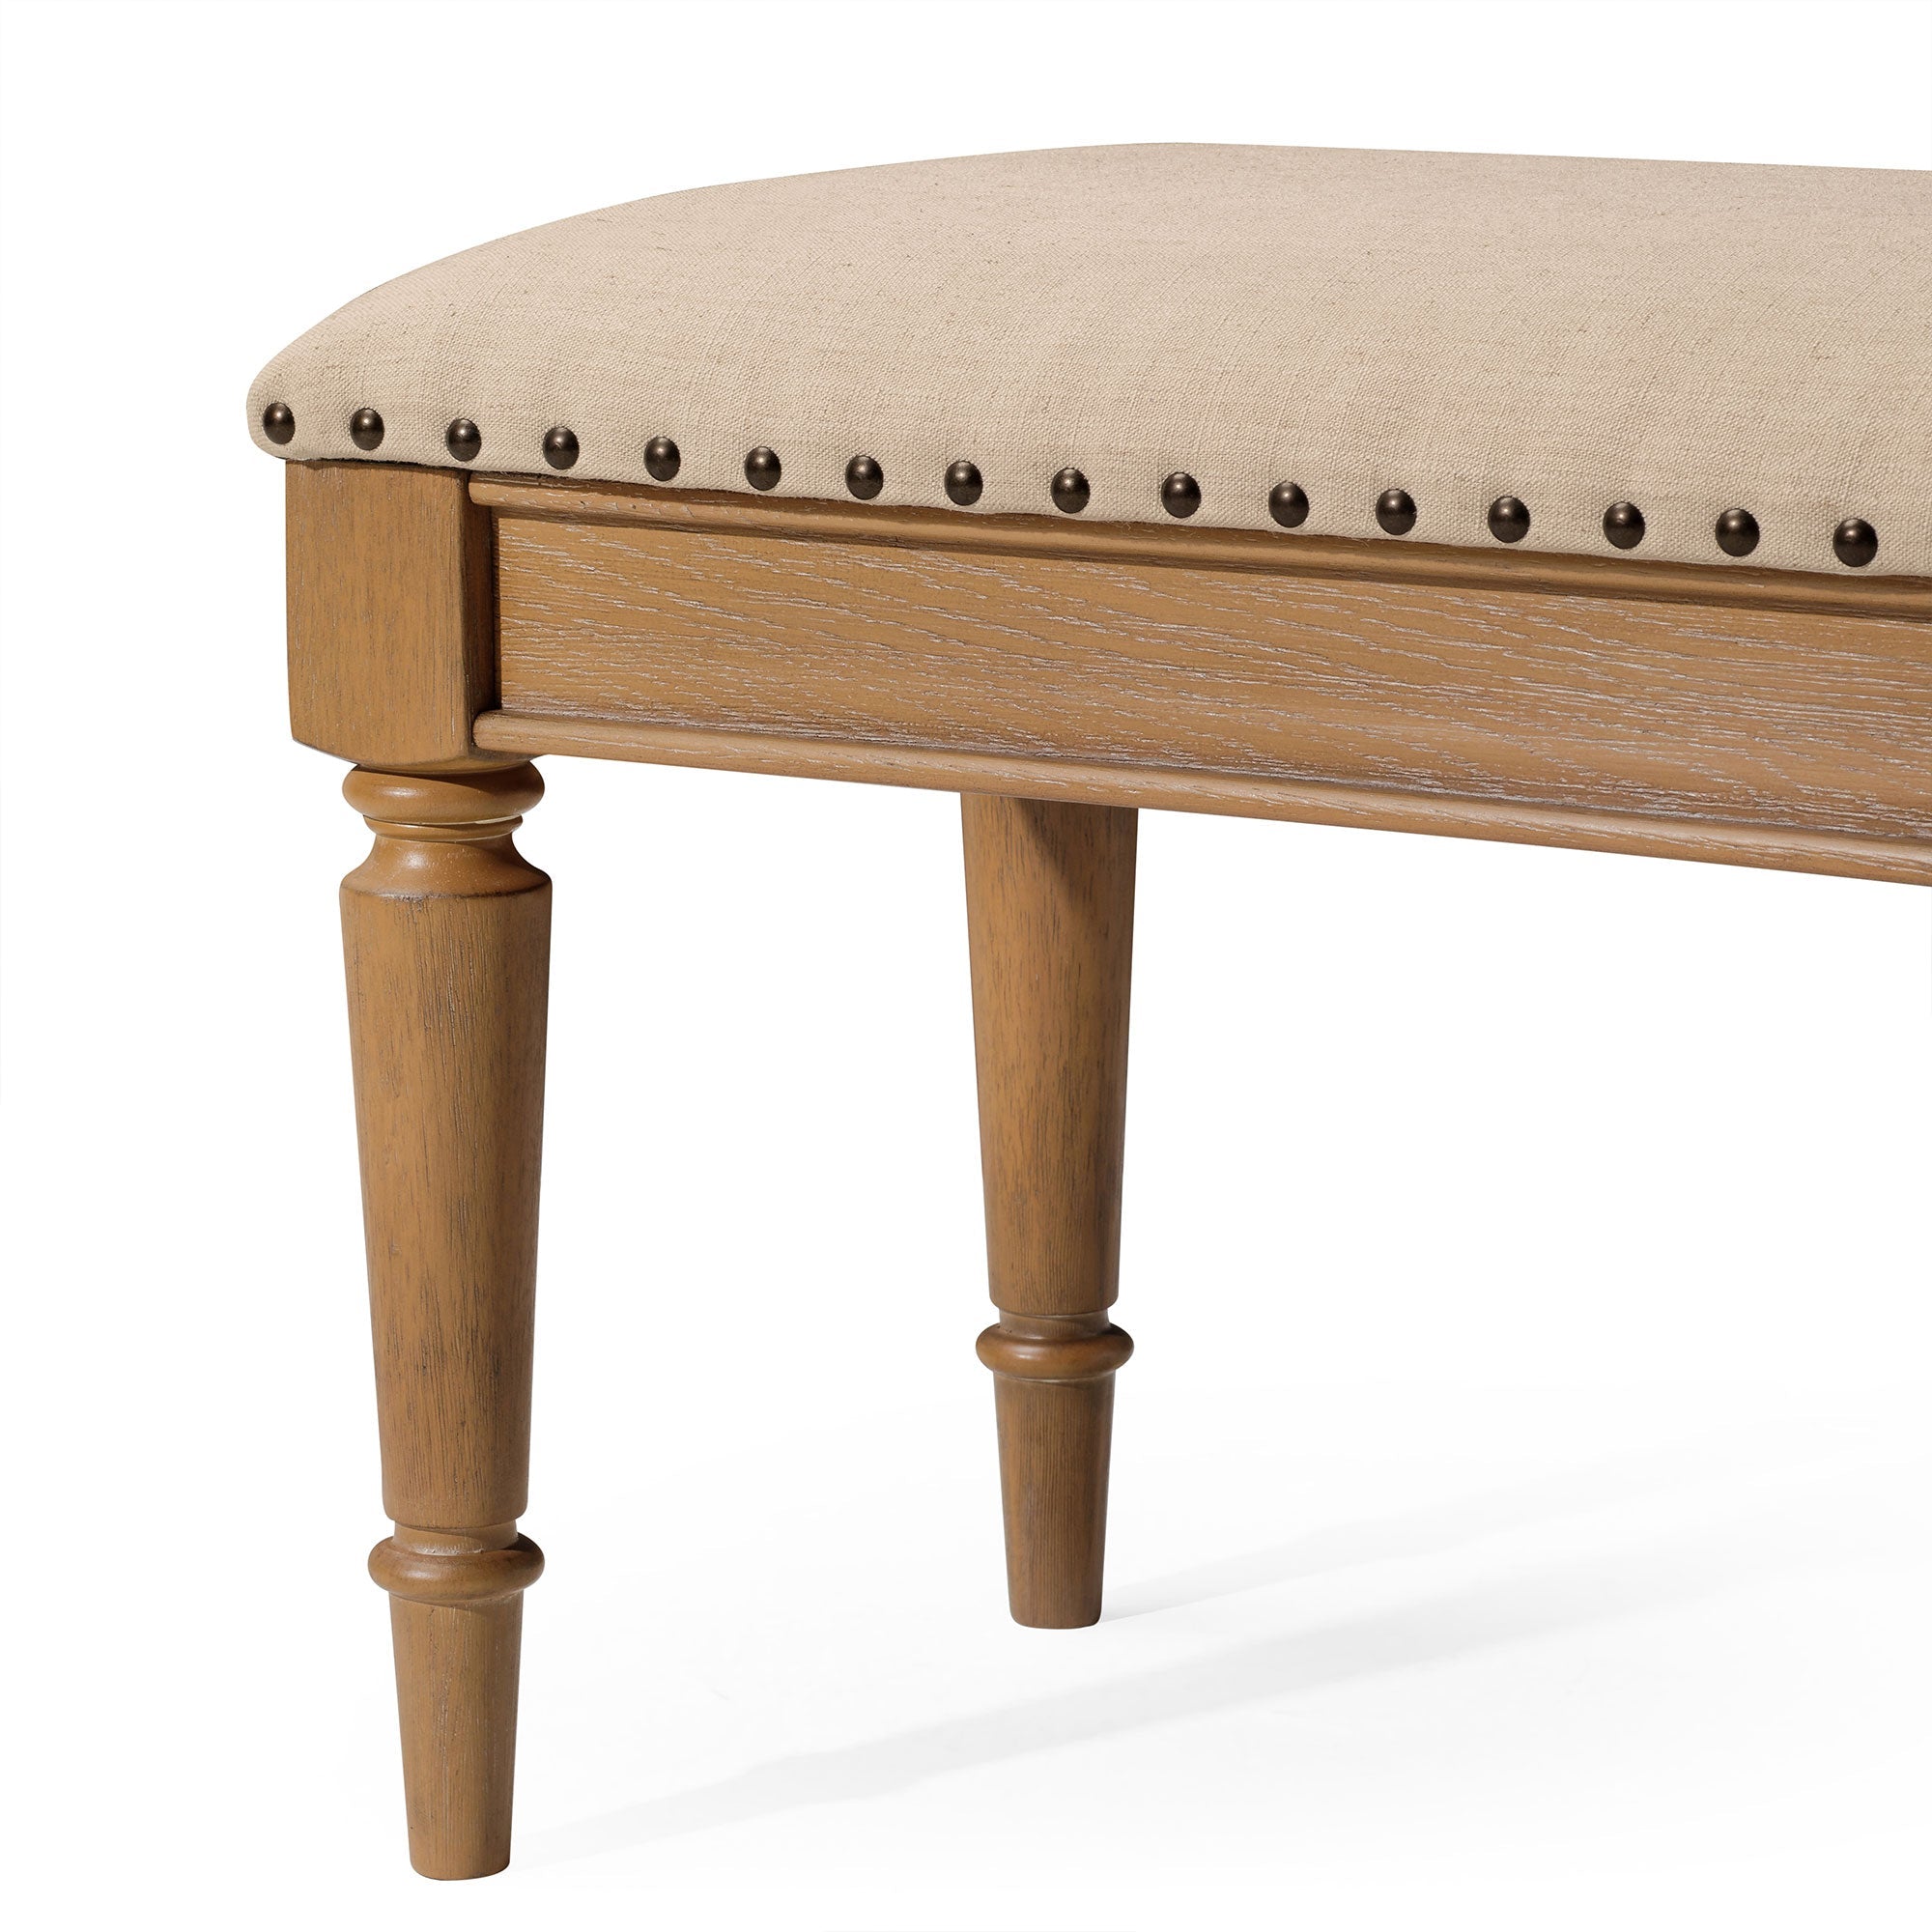 Elizabeth Classical Upholstered Wooden Bench in Antiqued Natural Finish in Ottomans & Benches by Maven Lane